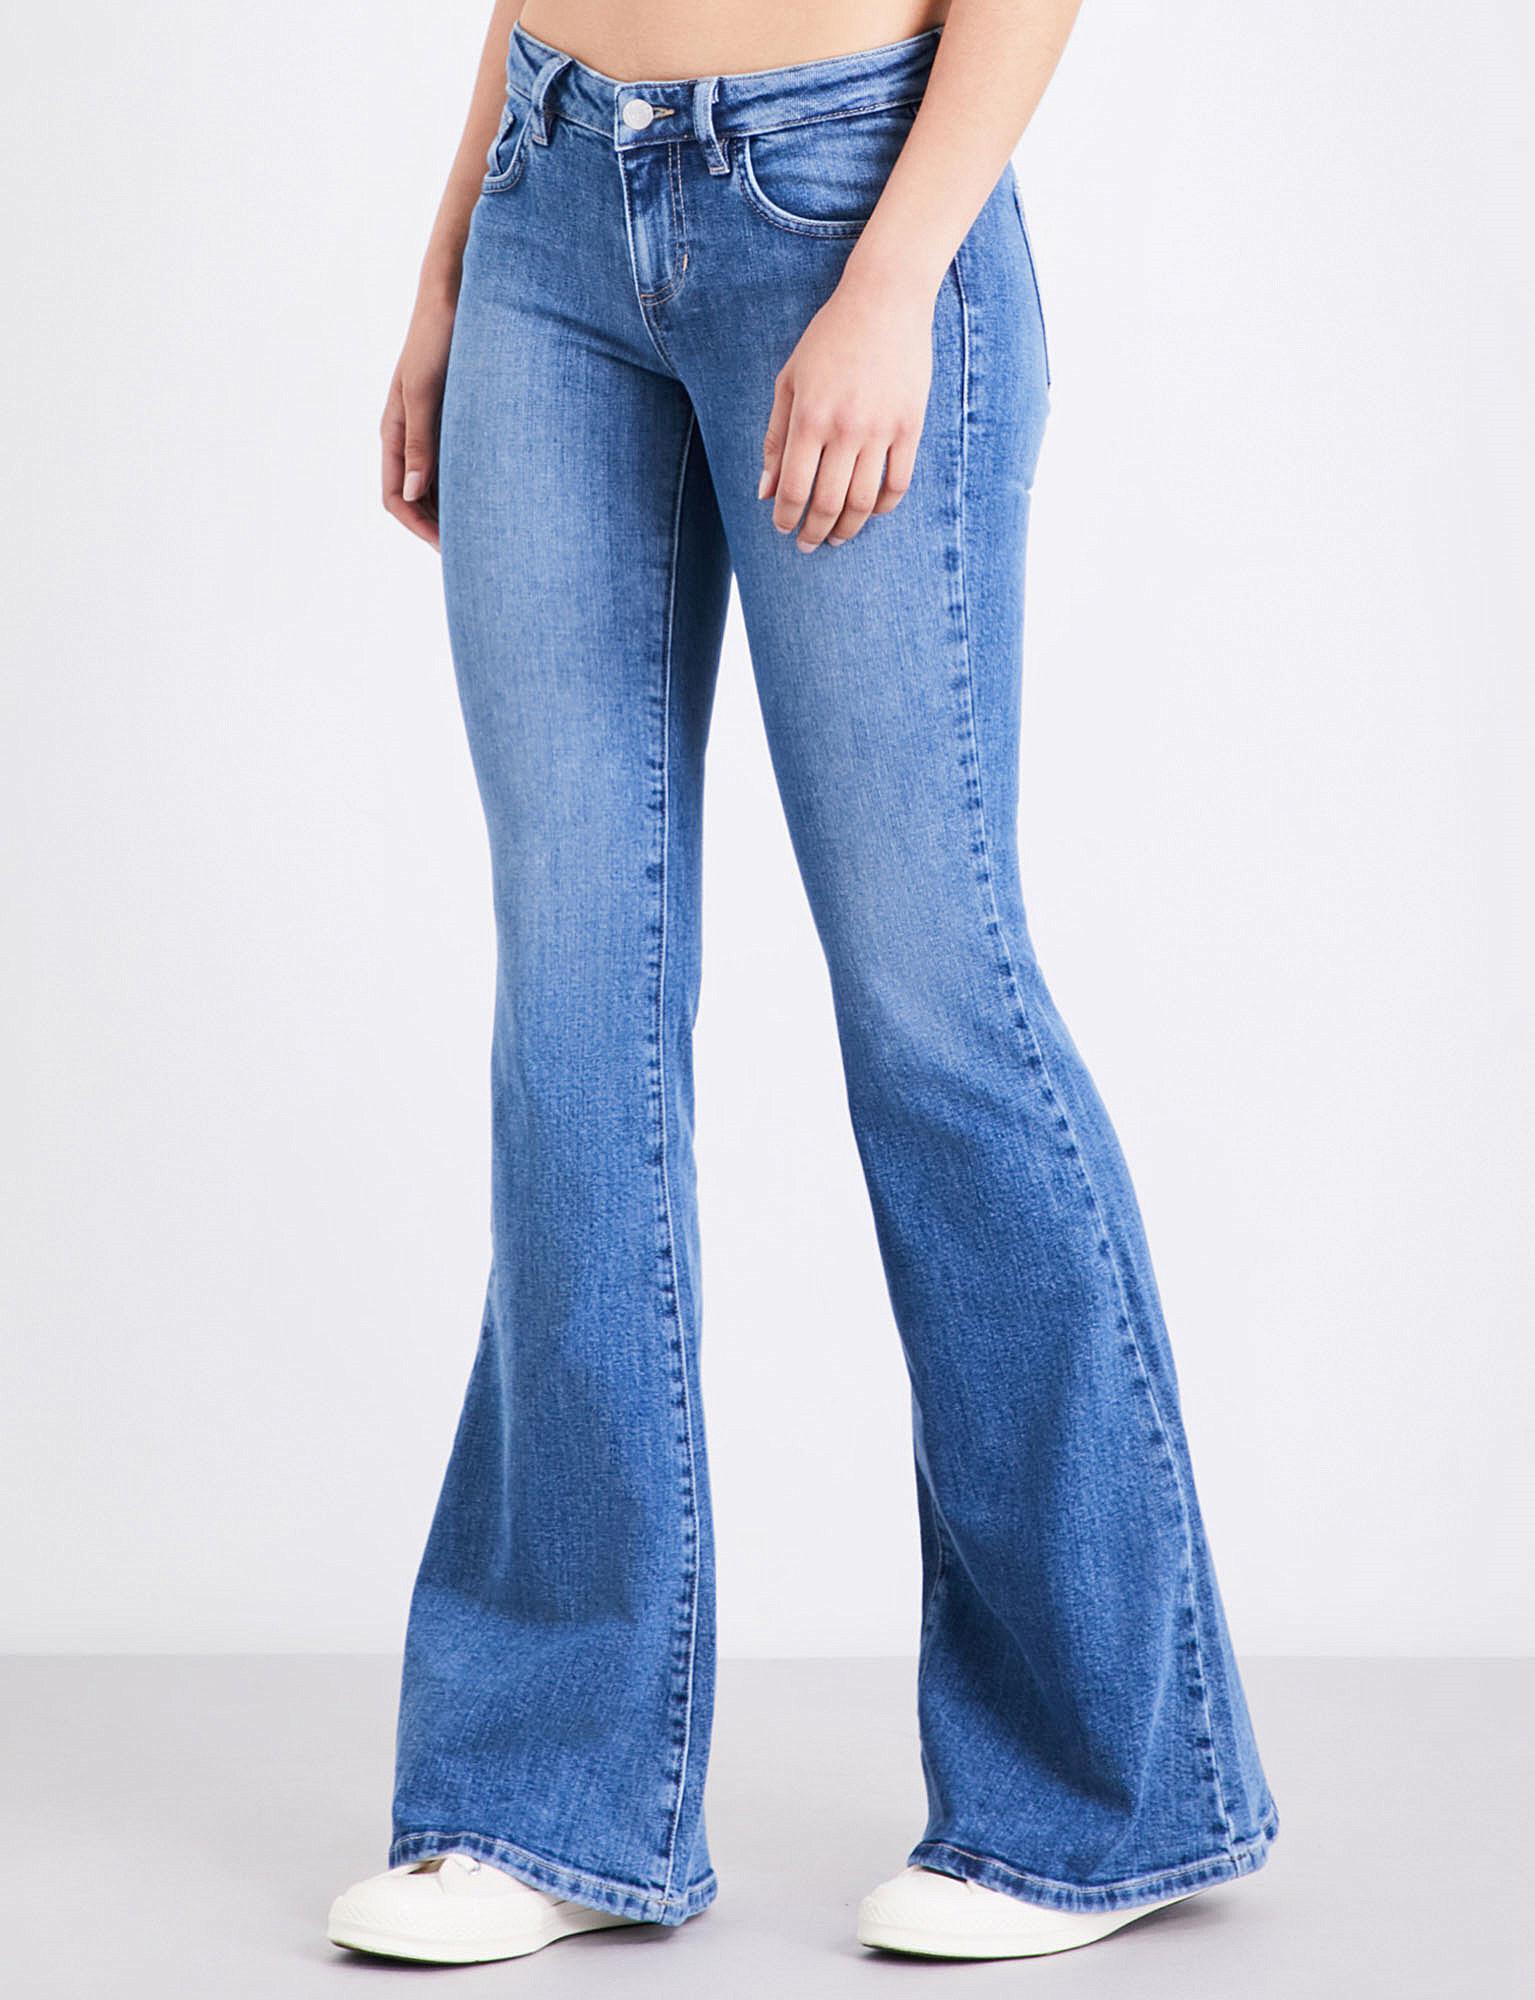 Guess Guess Originals X A$ap Rocky Bell Bottom Flare Low-rise Jeans in Blue  | Lyst